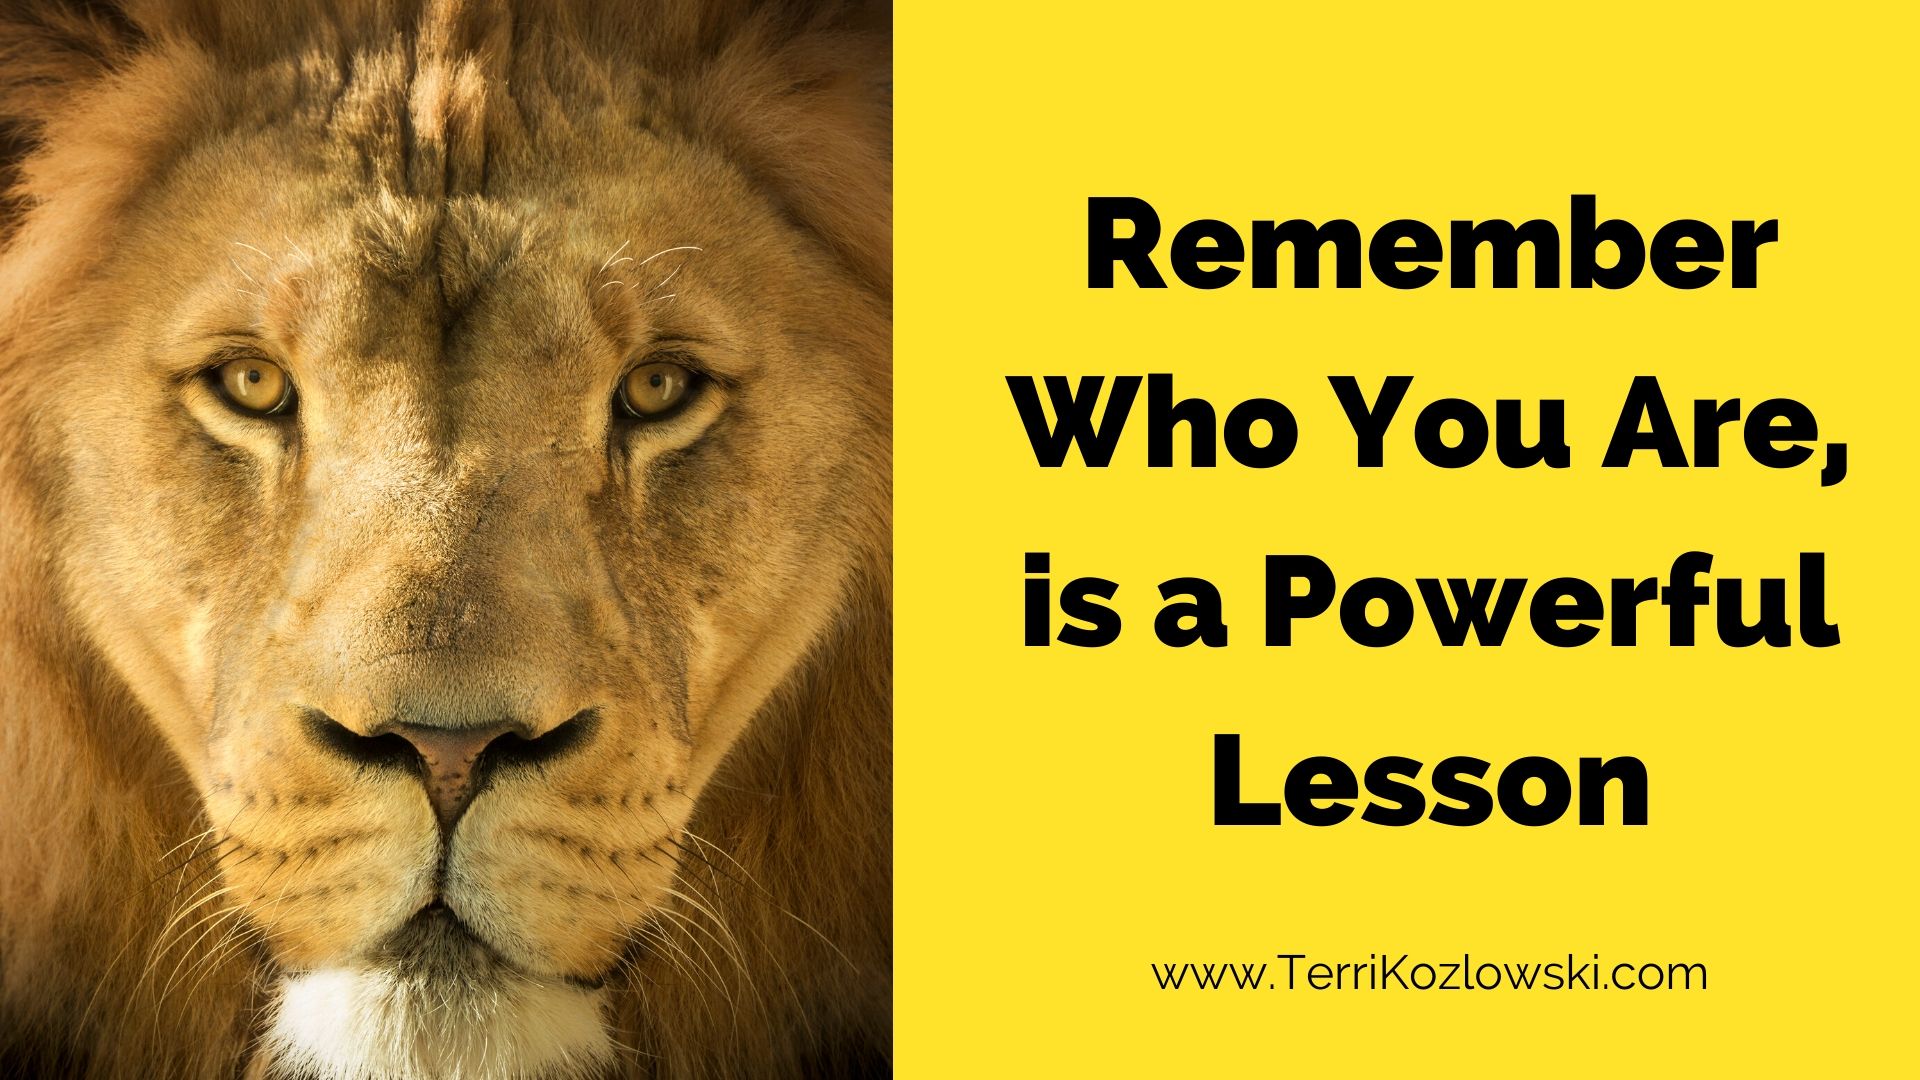 Remember Who You Are, Is a Powerful Lesson